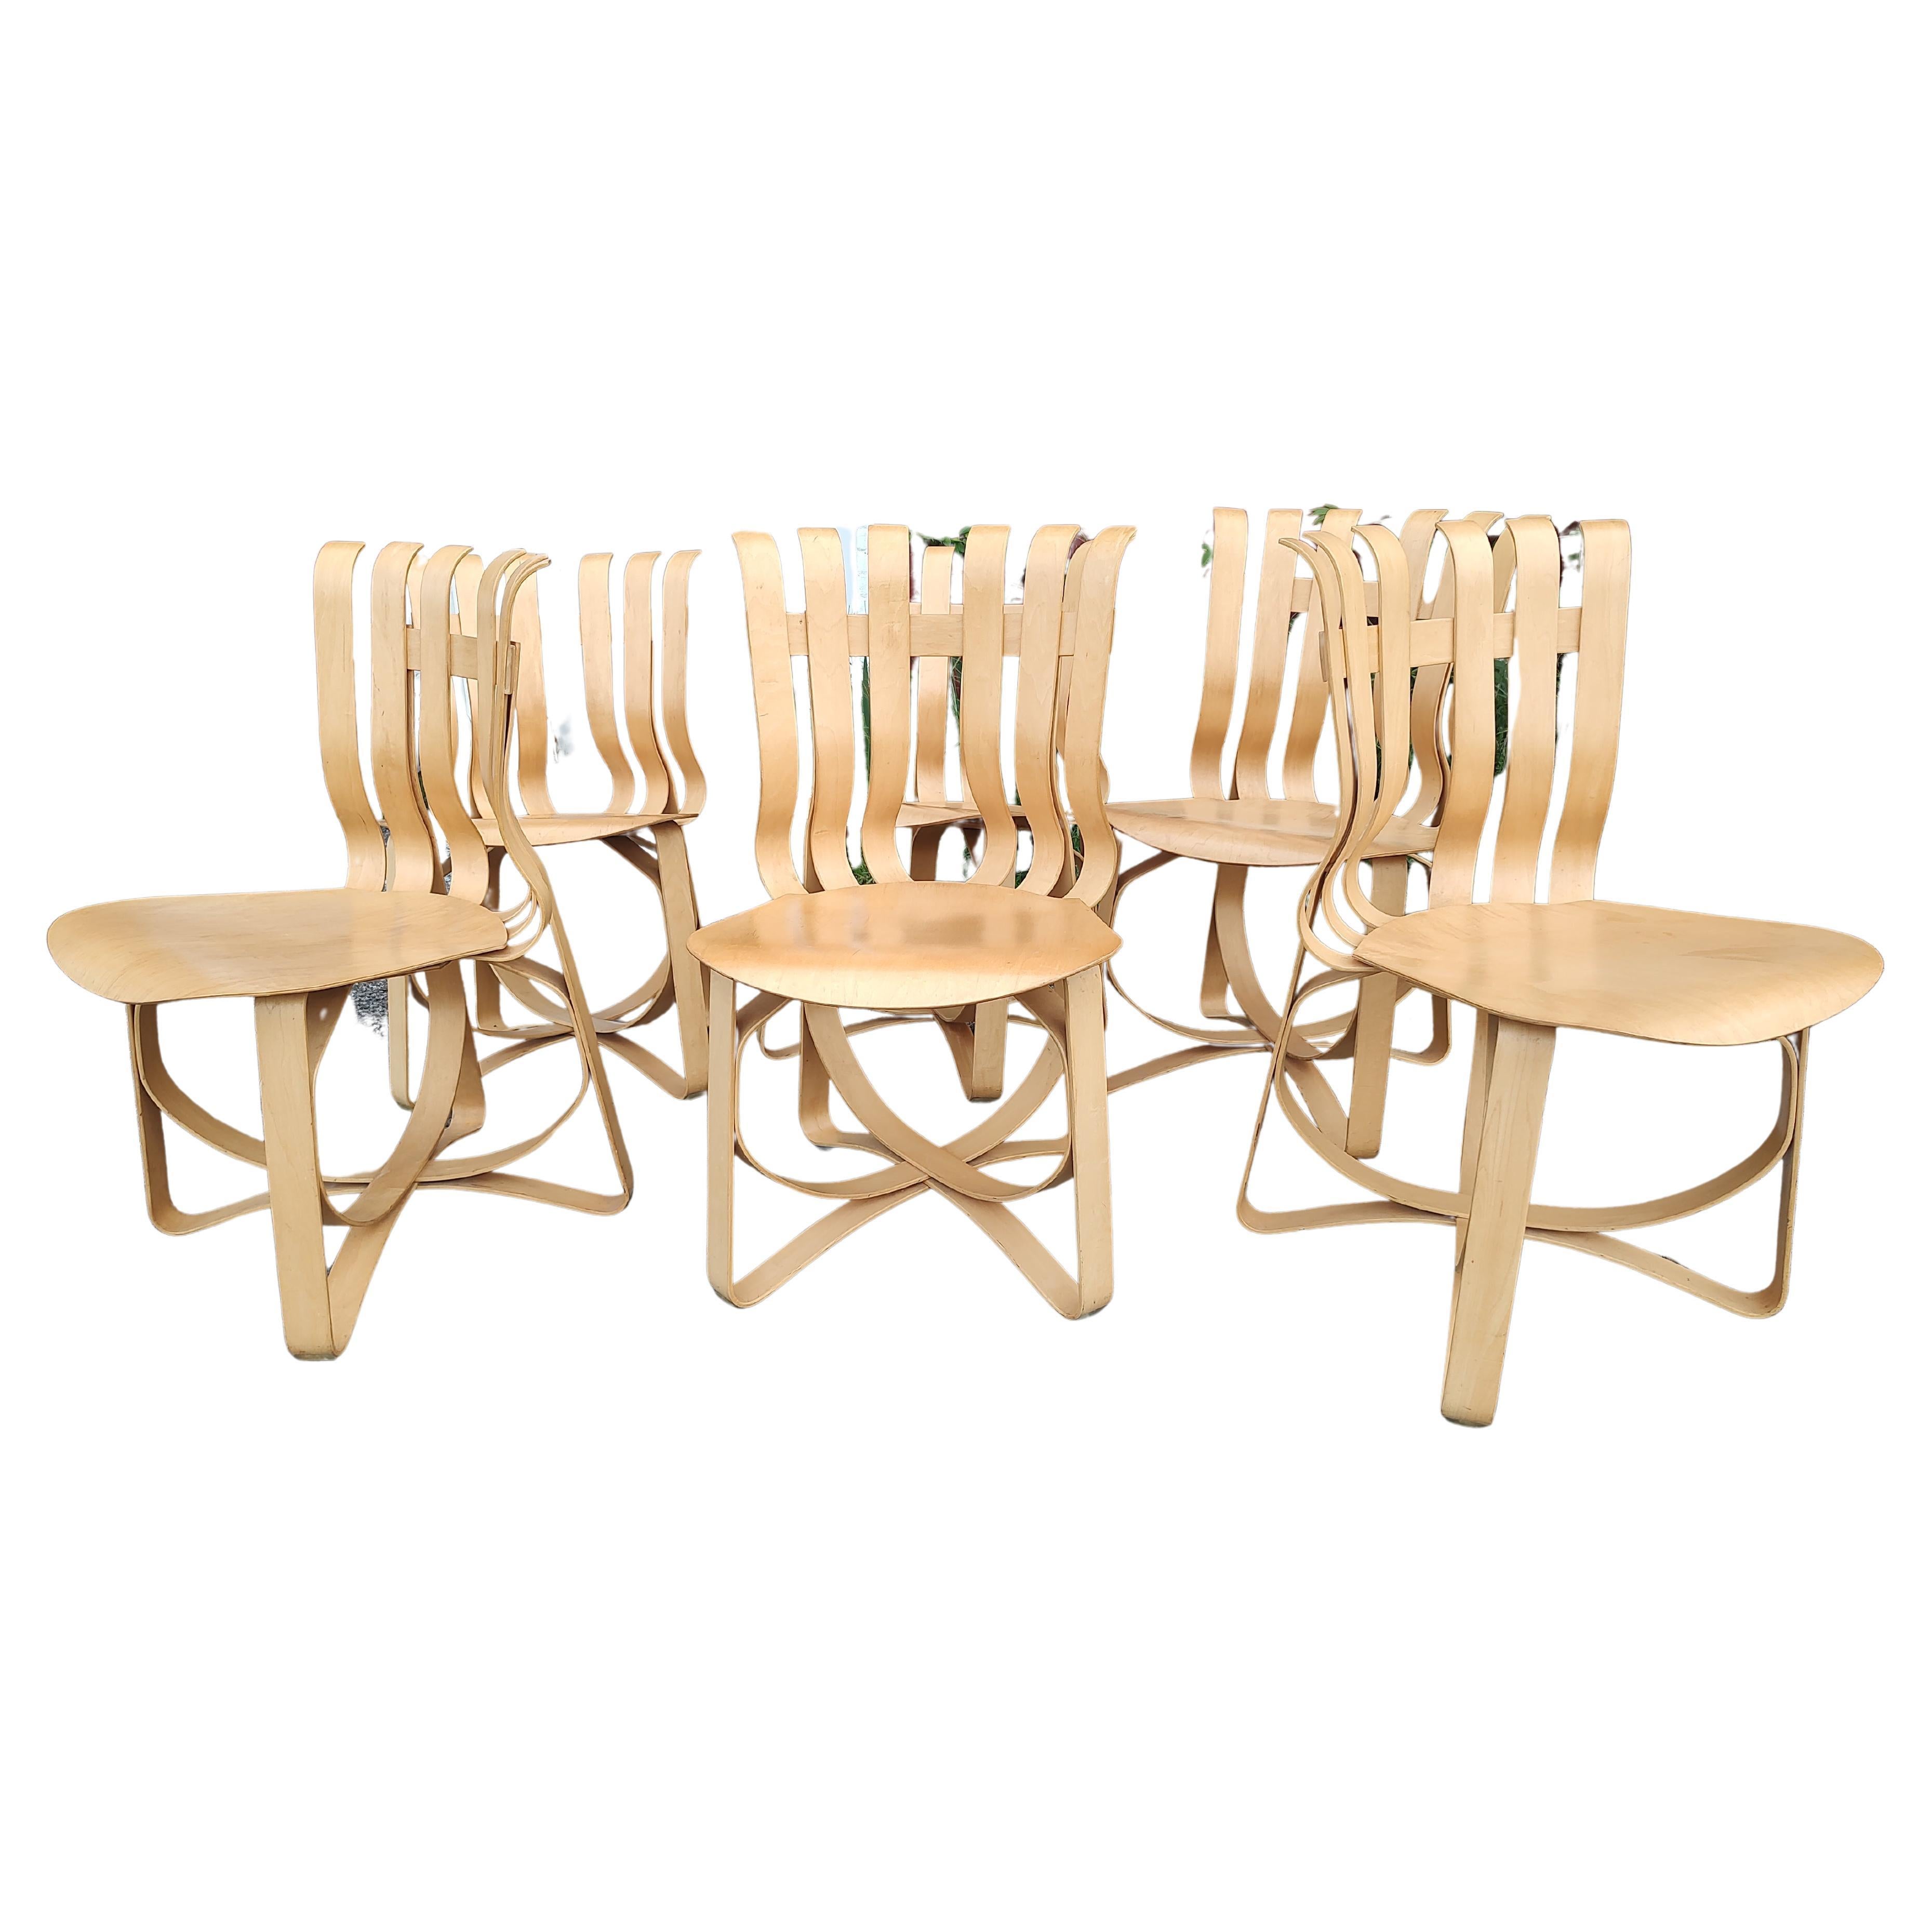 Mid Century Modern Sculptural Birch 6 Hat Trick Chairs by Frank Gehry - Knoll For Sale